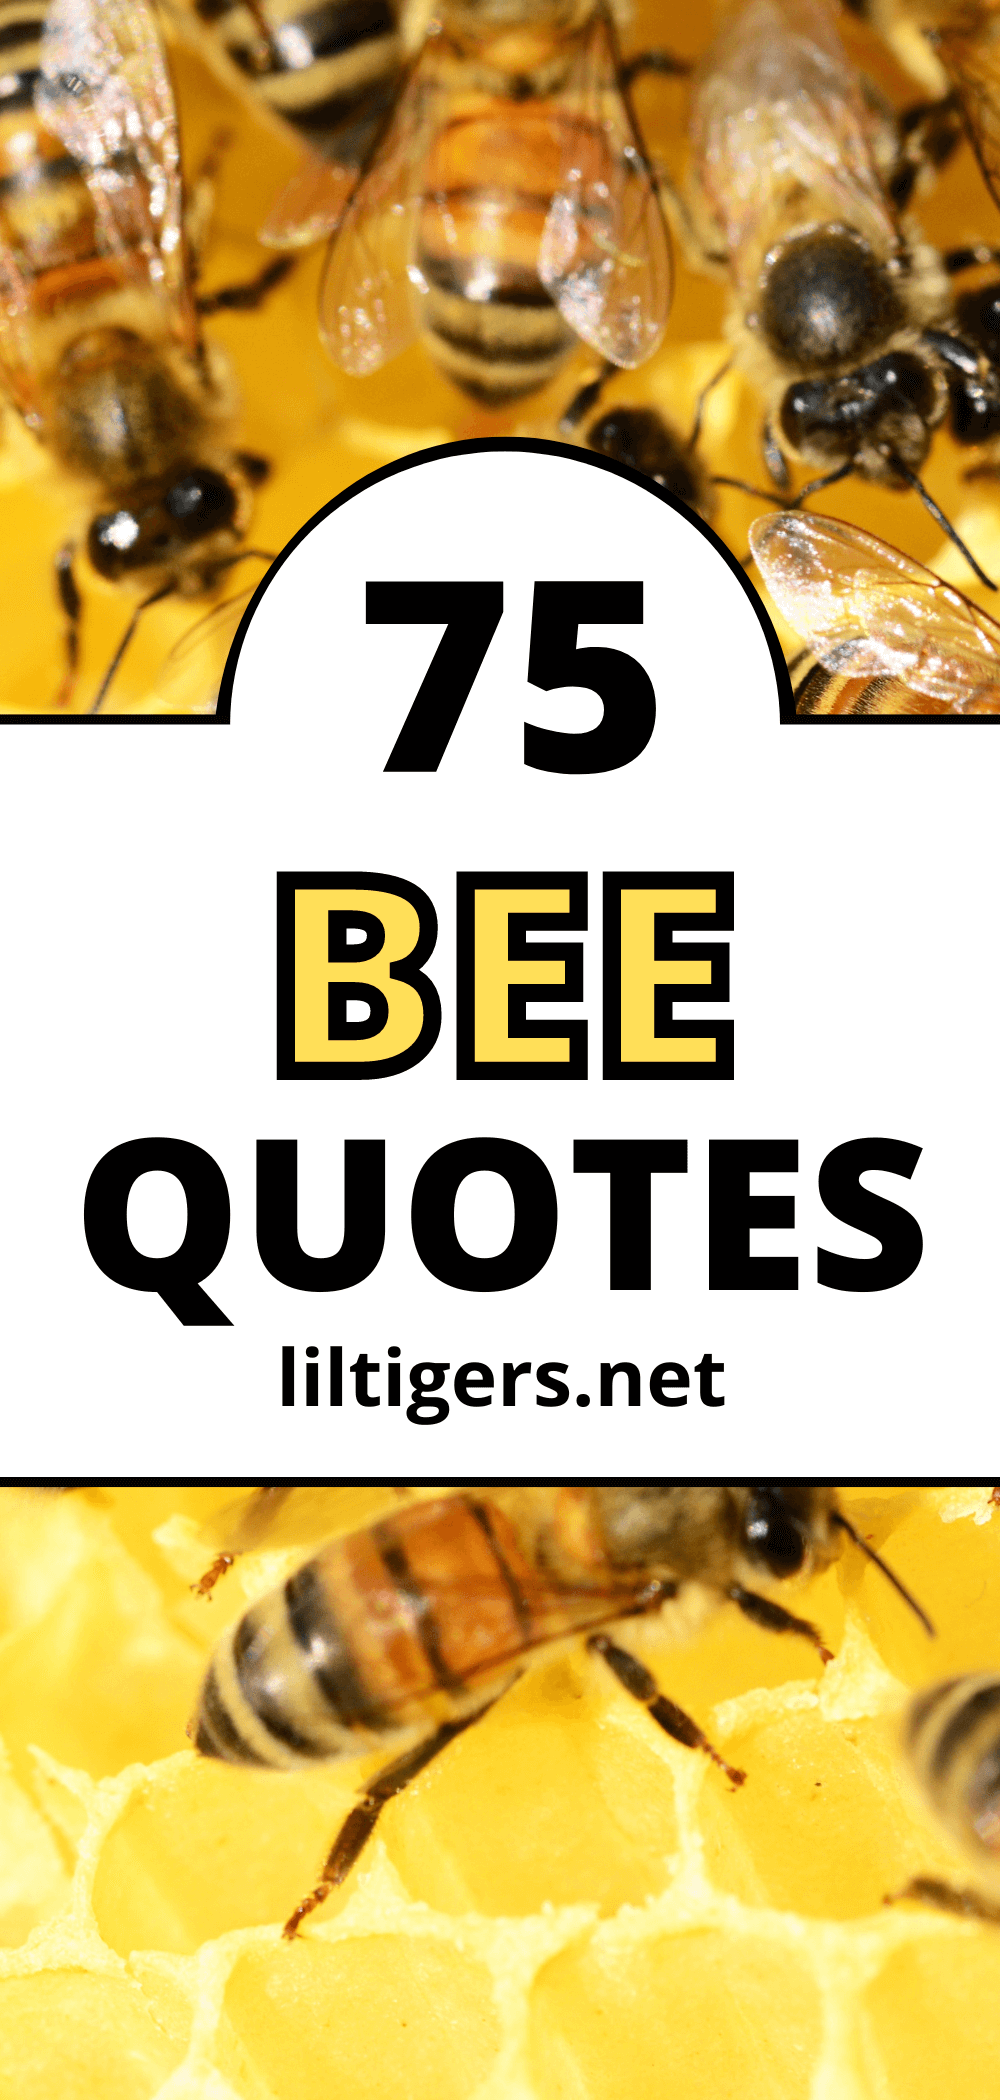 catchy bee quotes